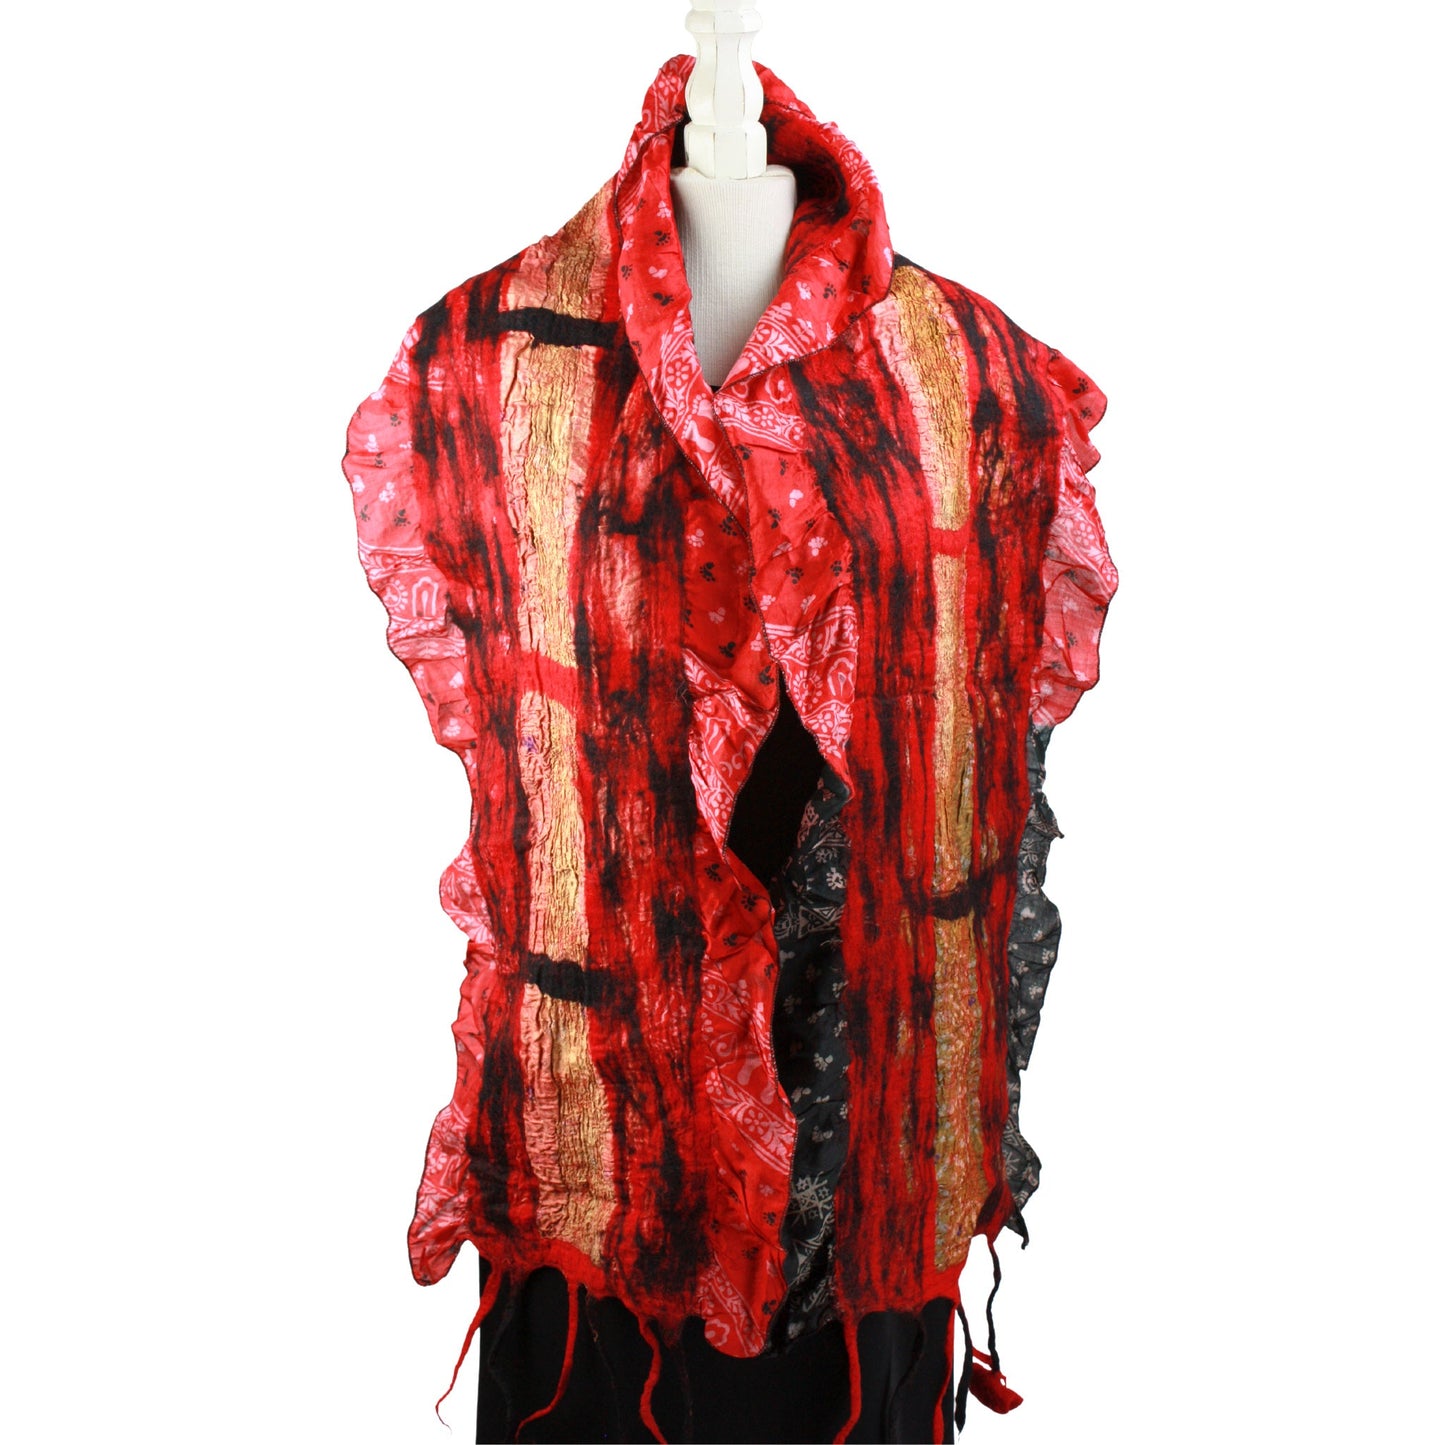 Sari collage scarf in pinks, red, pink, ochre and black